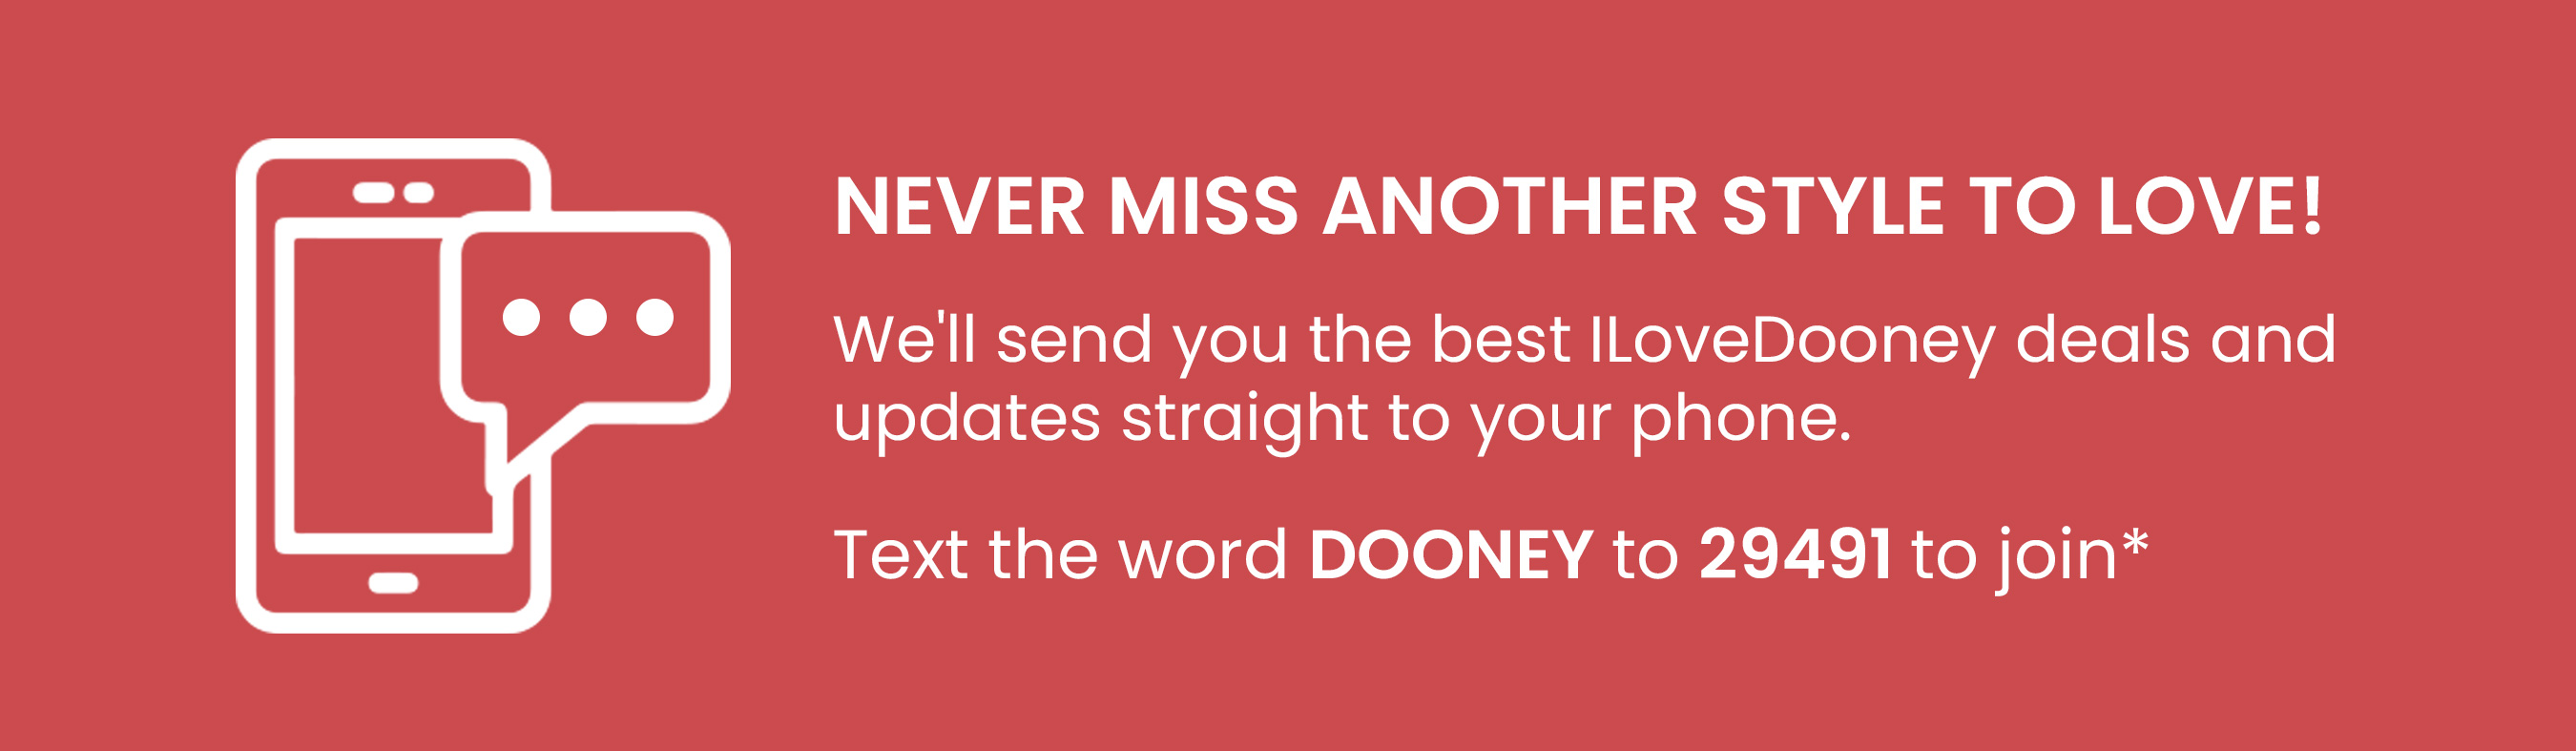 Never miss another style to love! We'll send you the best ILoveDooney deals and updates straight to your phone. Text the word DOONEY to 29491 to join*